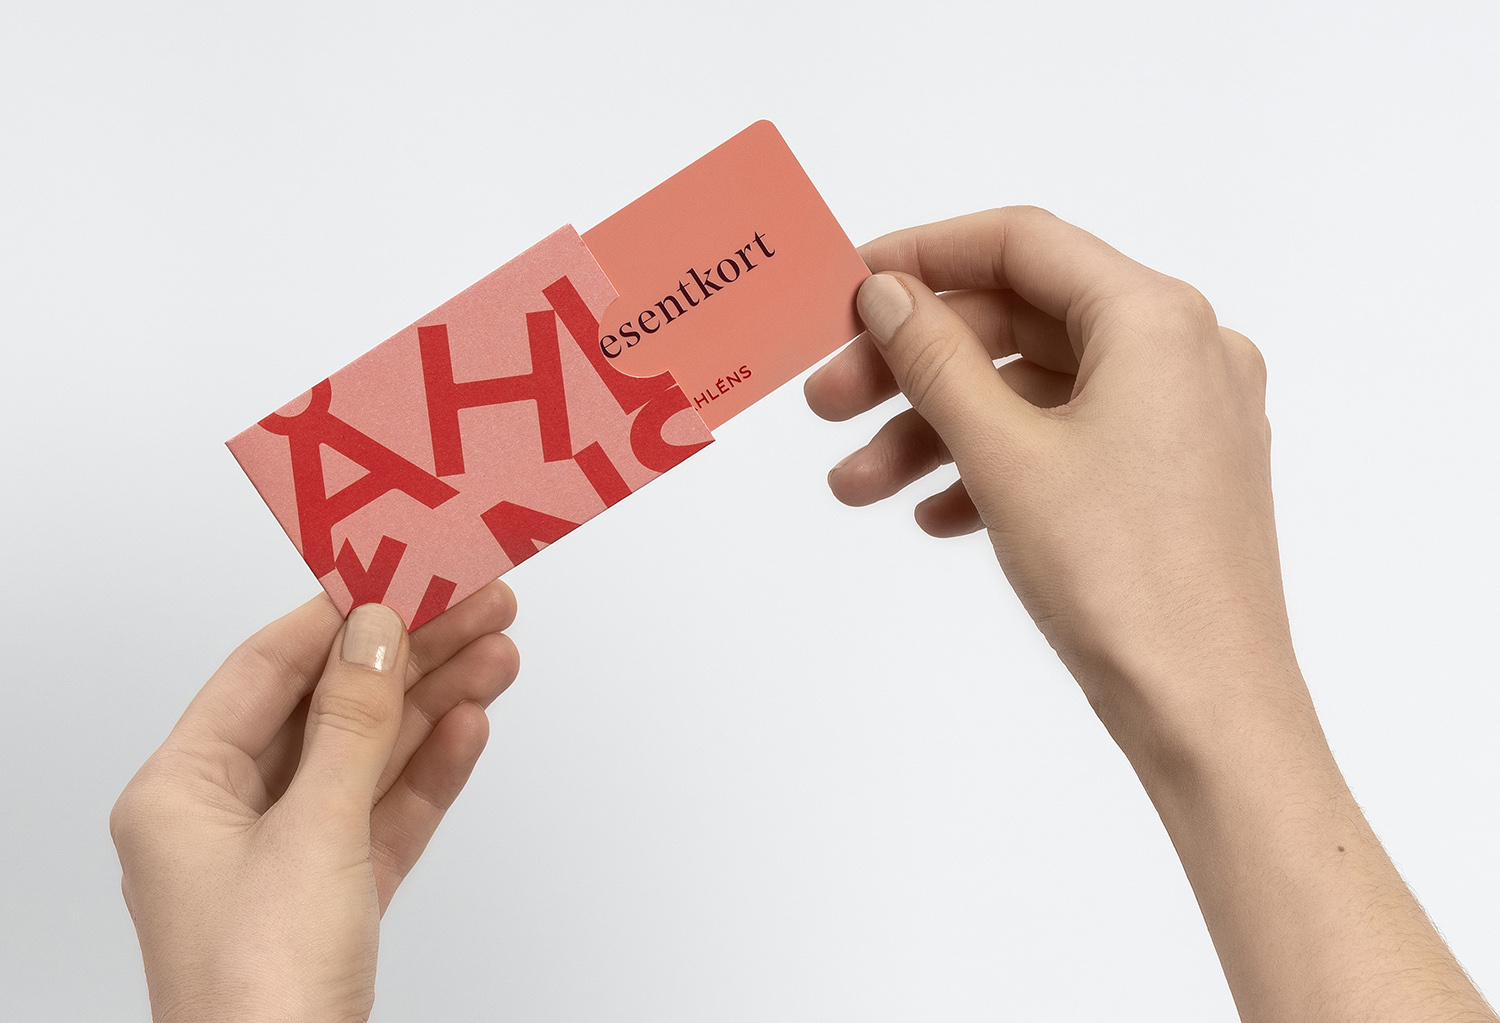 Visual identity and gift card by Happy FB for Swedish retailer Åhléns